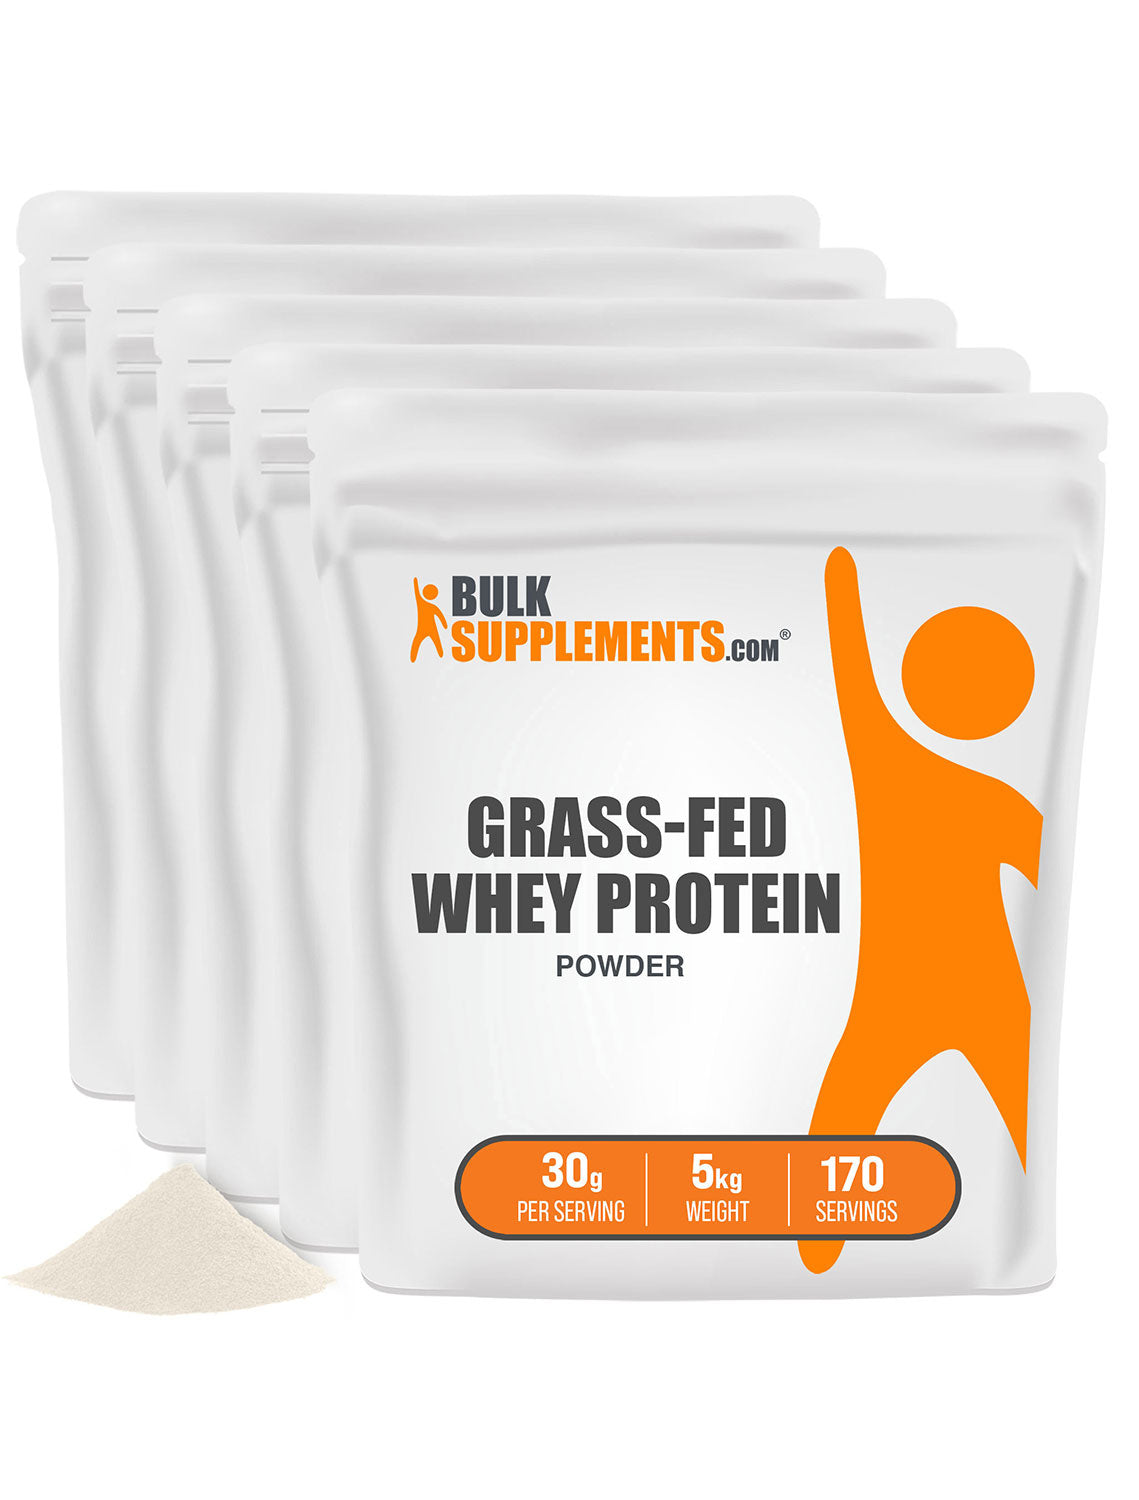 BulkSupplements Grass-Fed Whey Protein Powder 5 Kilograms bags